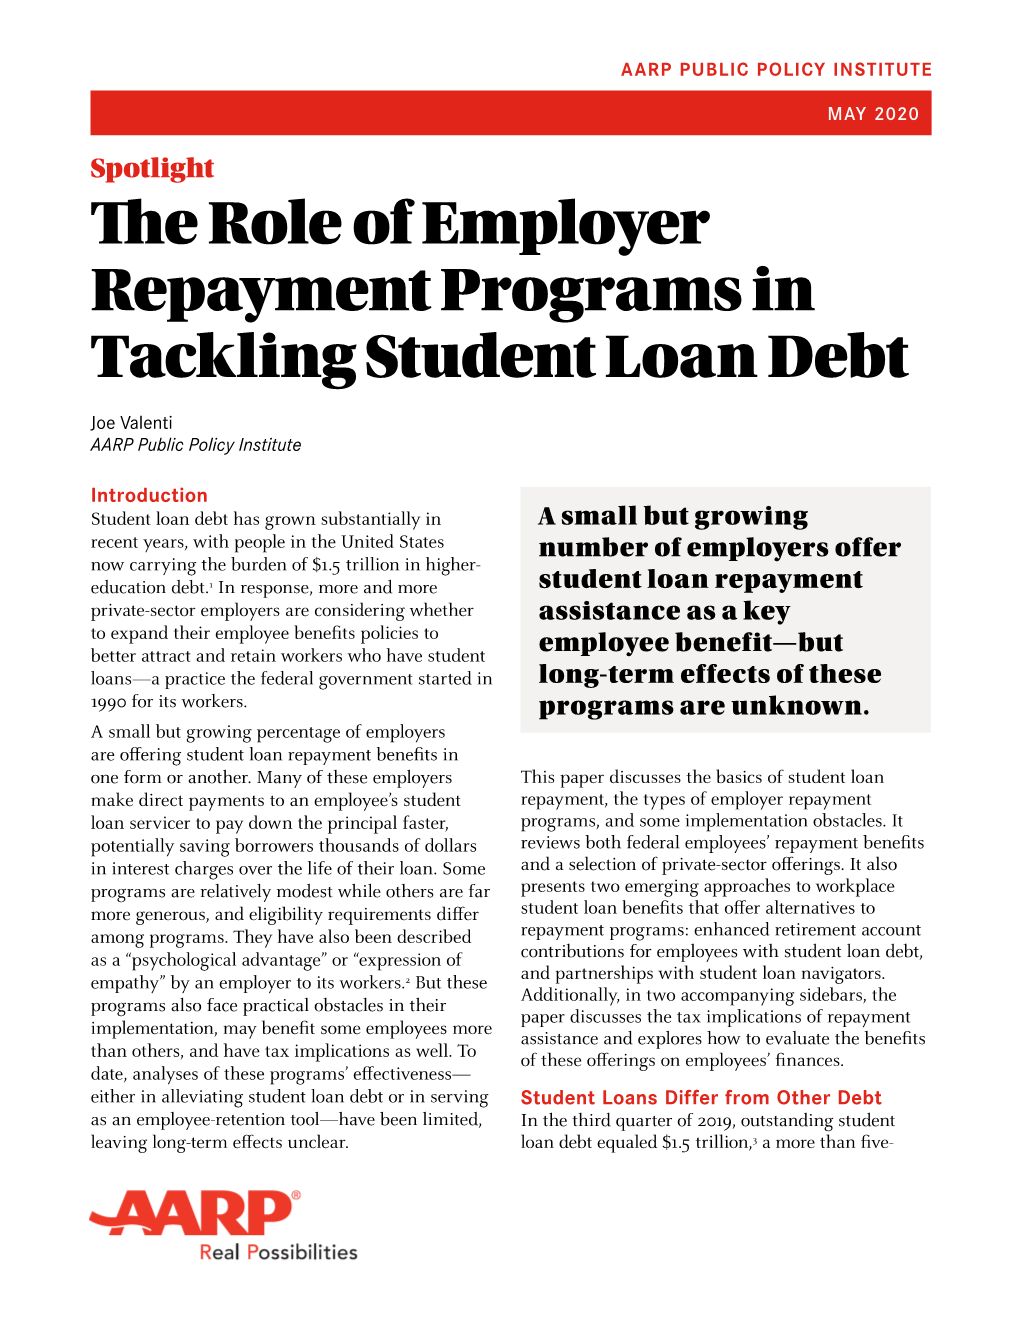 The Role of Employer Repayment Programs in Tackling Student Loan Debt